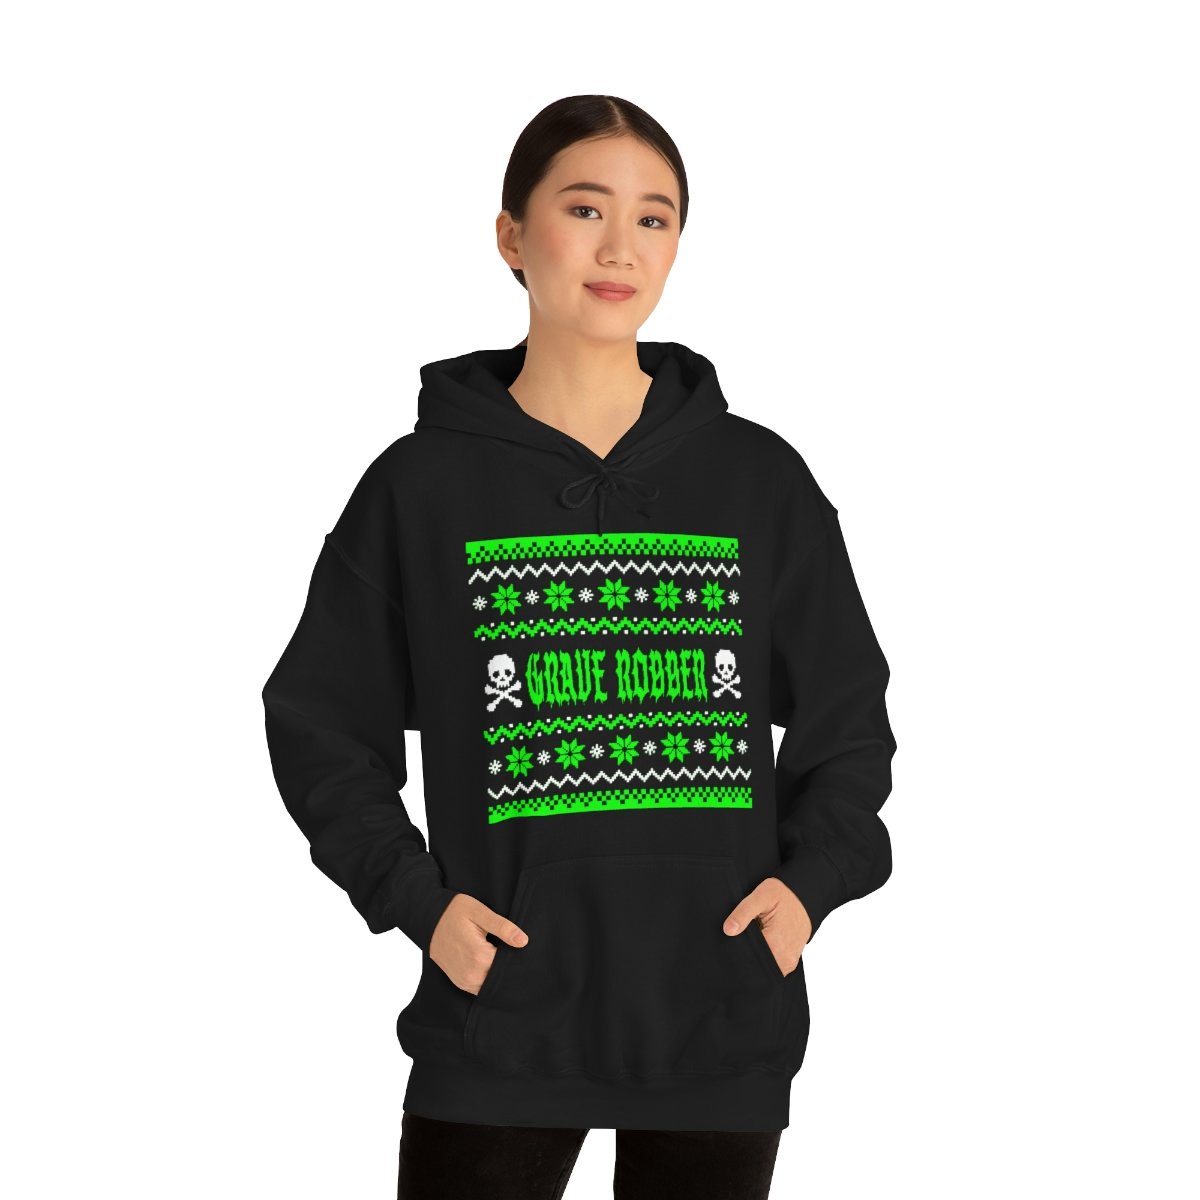 Grave Robber Ugly Christmas Sweater Pullover Hooded Sweatshirt